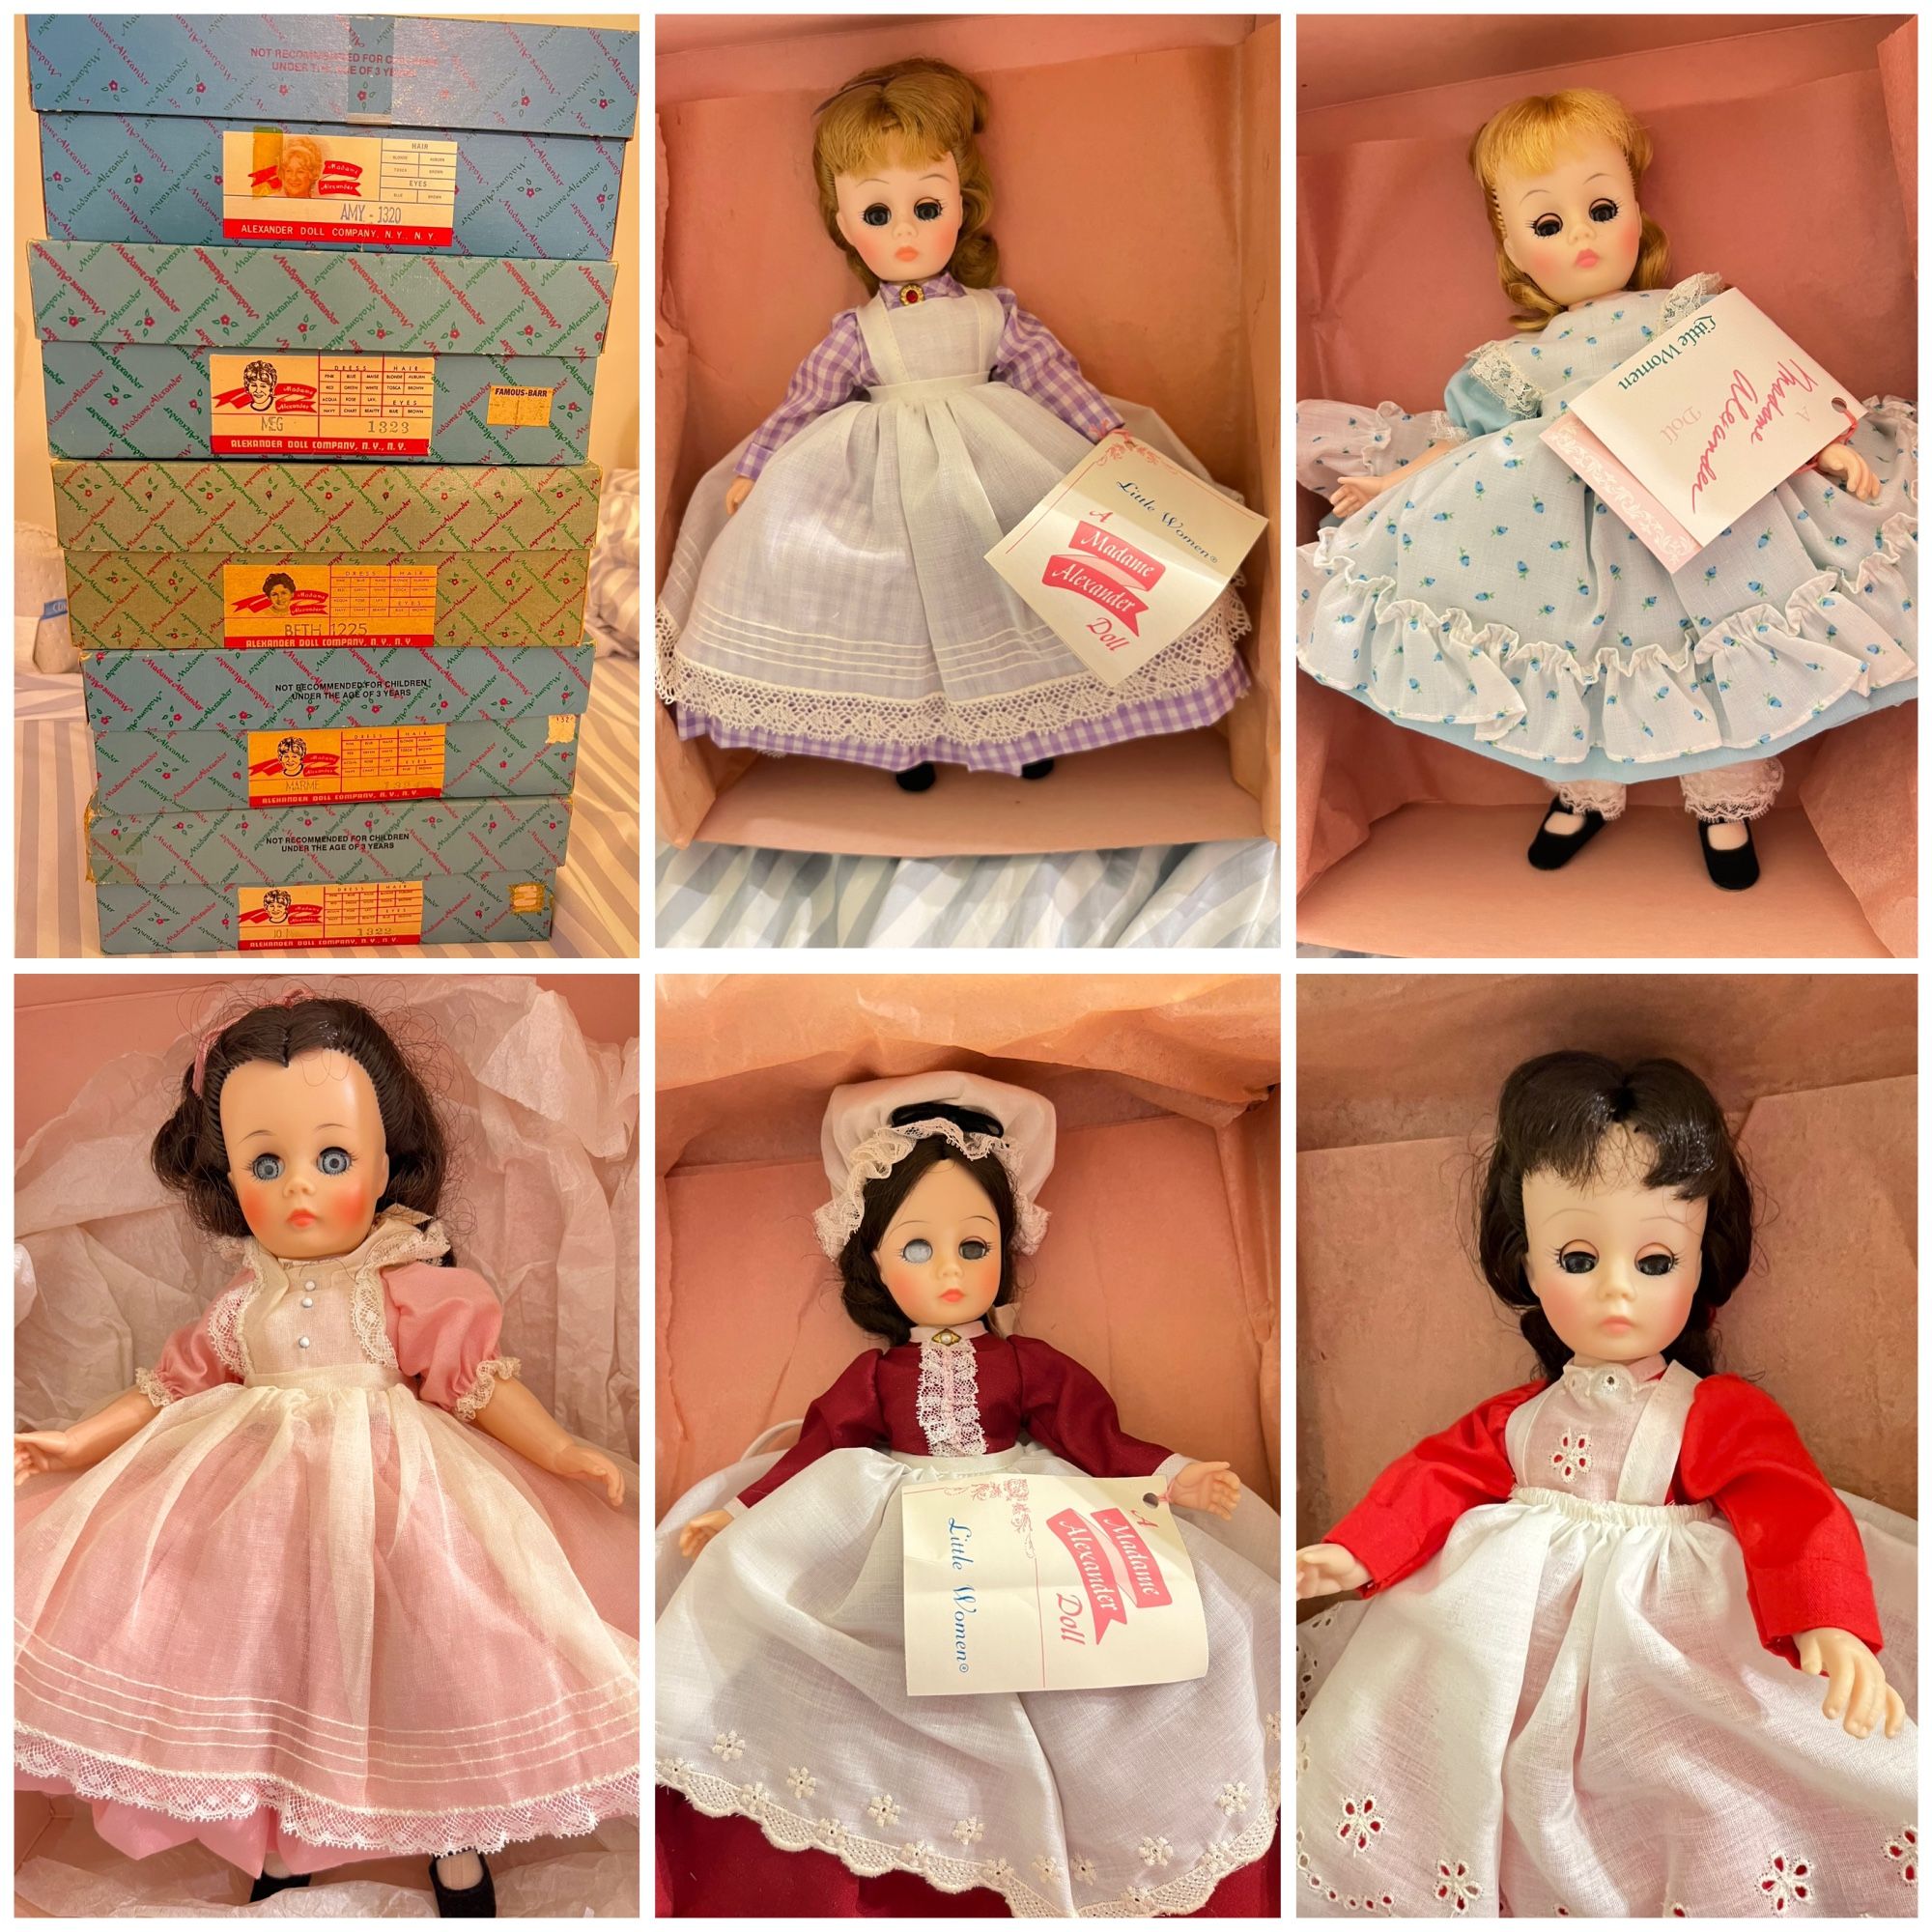 Little Women Set Of 11” Vintage Madame Alexander Dolls from the 1970’s in Original Box / packaging 